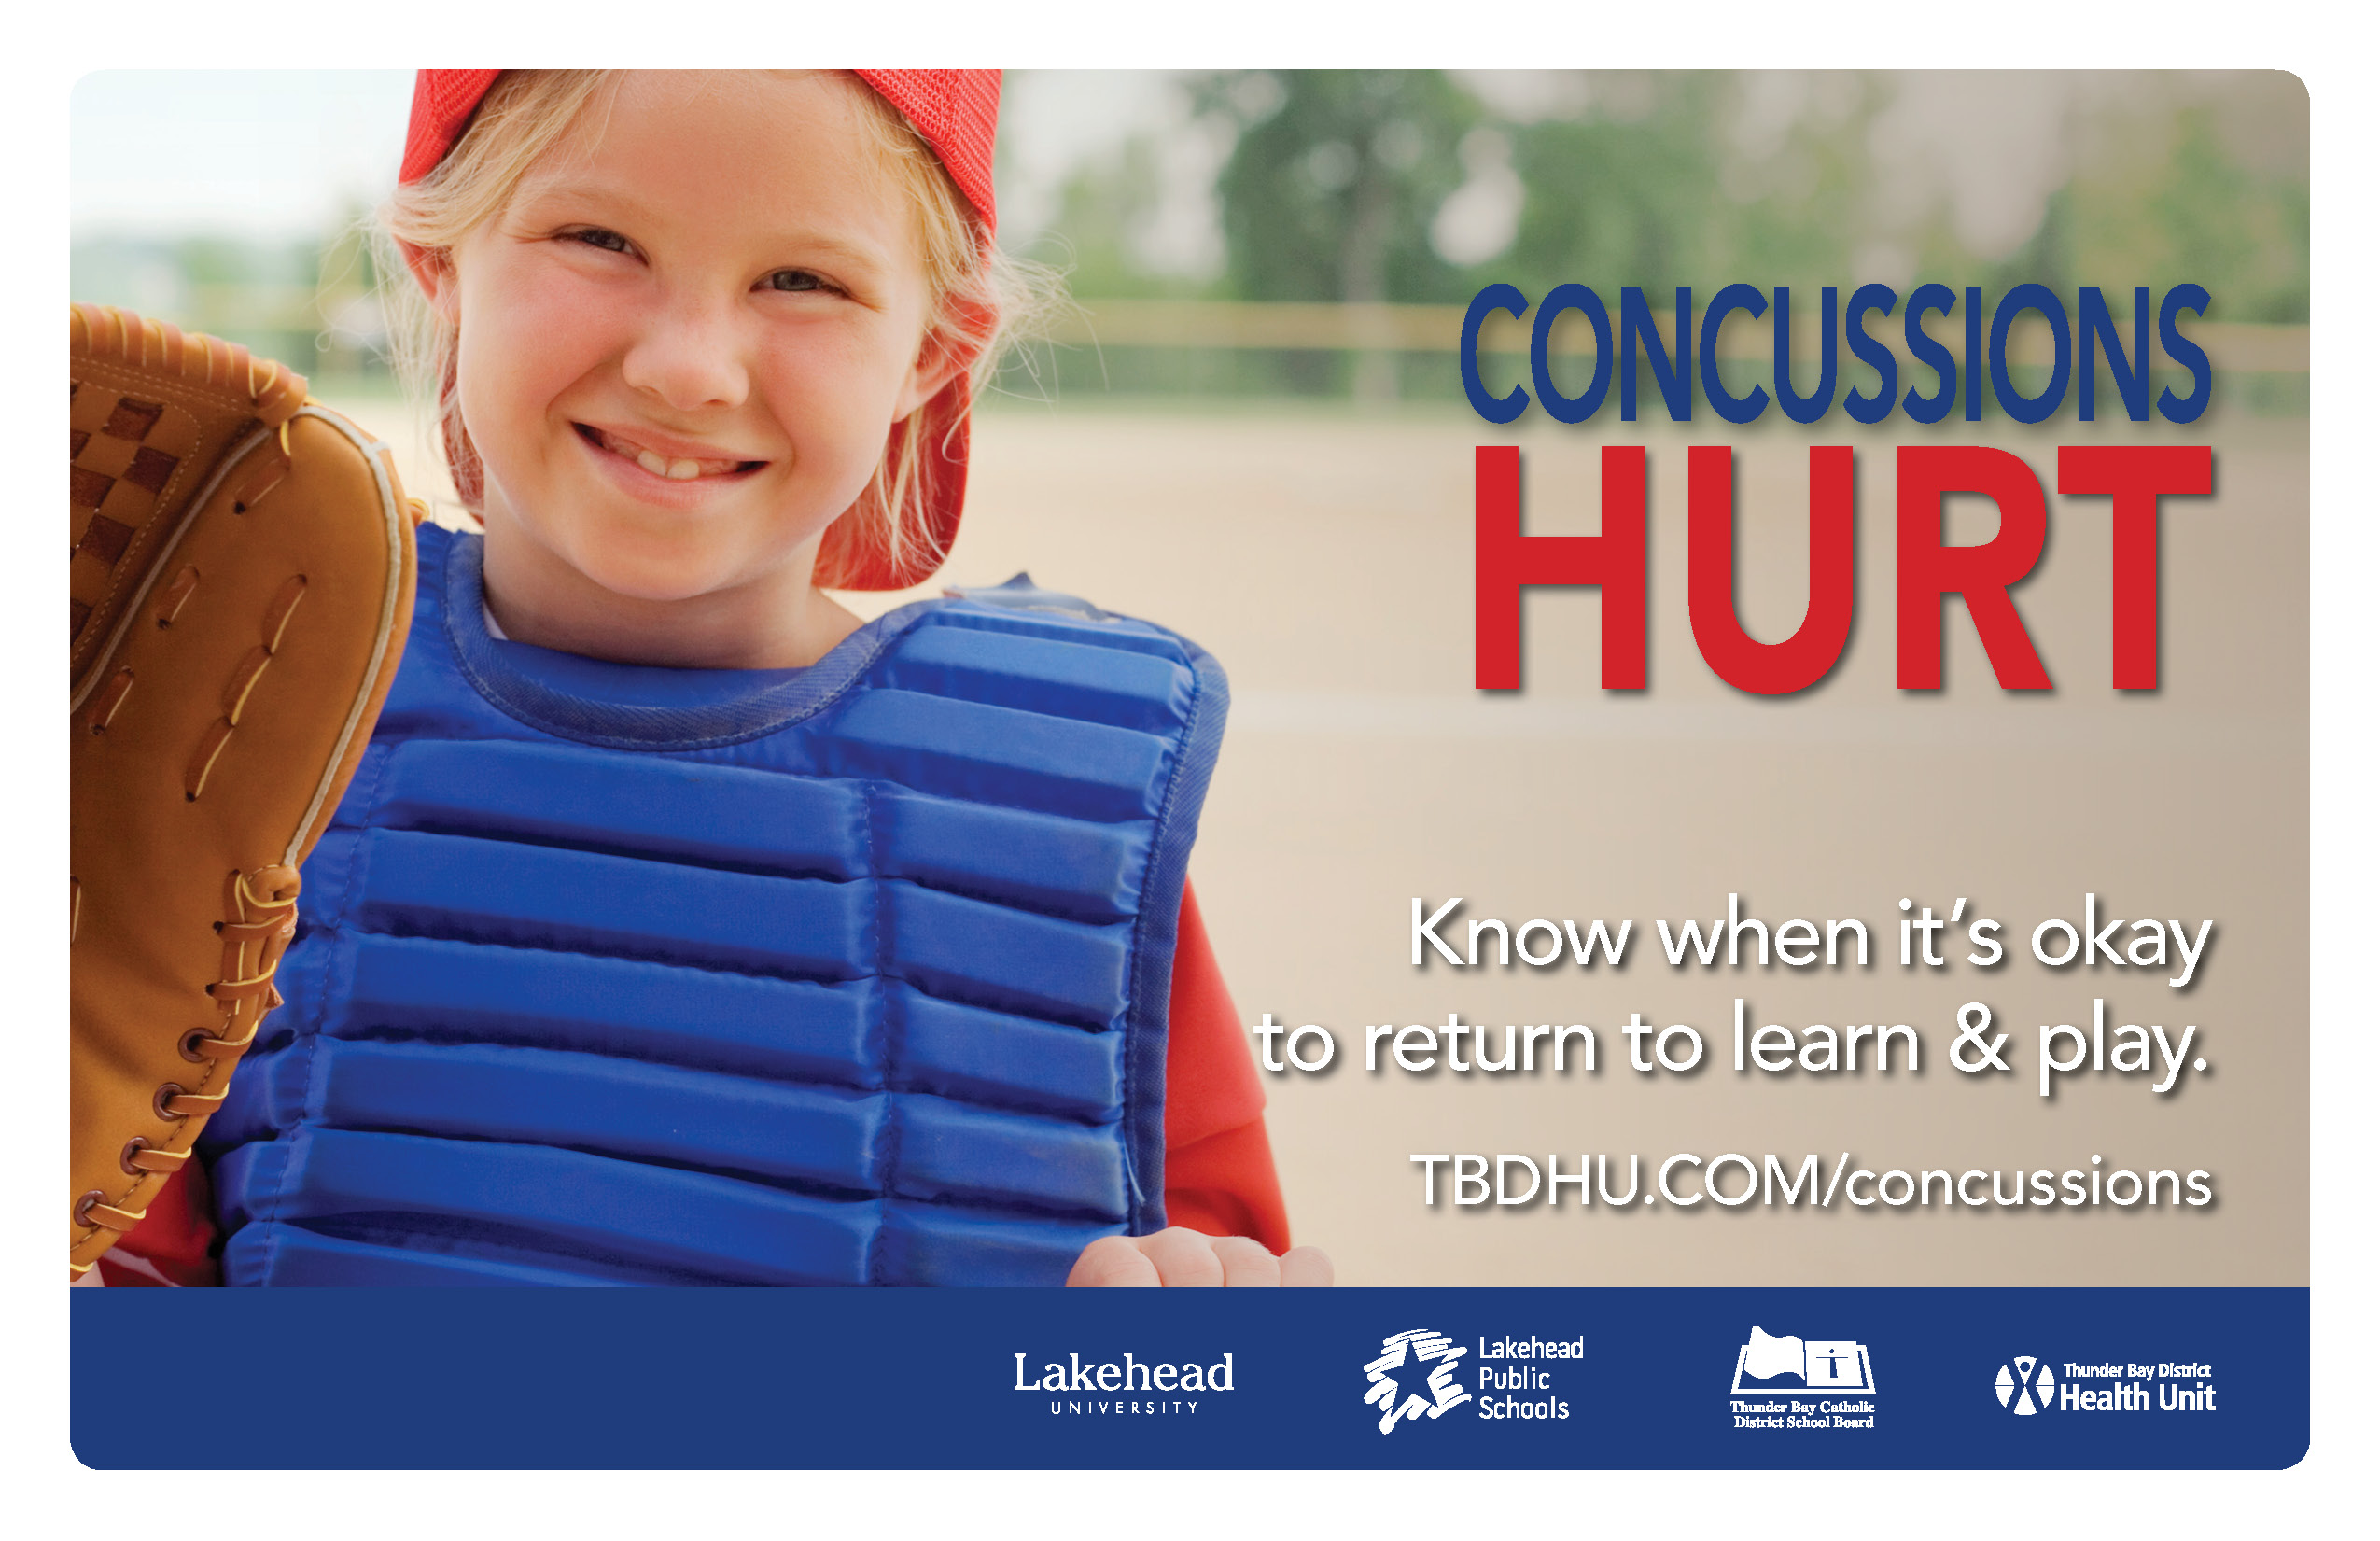 Concussions Hurt - young girl, batcatcher